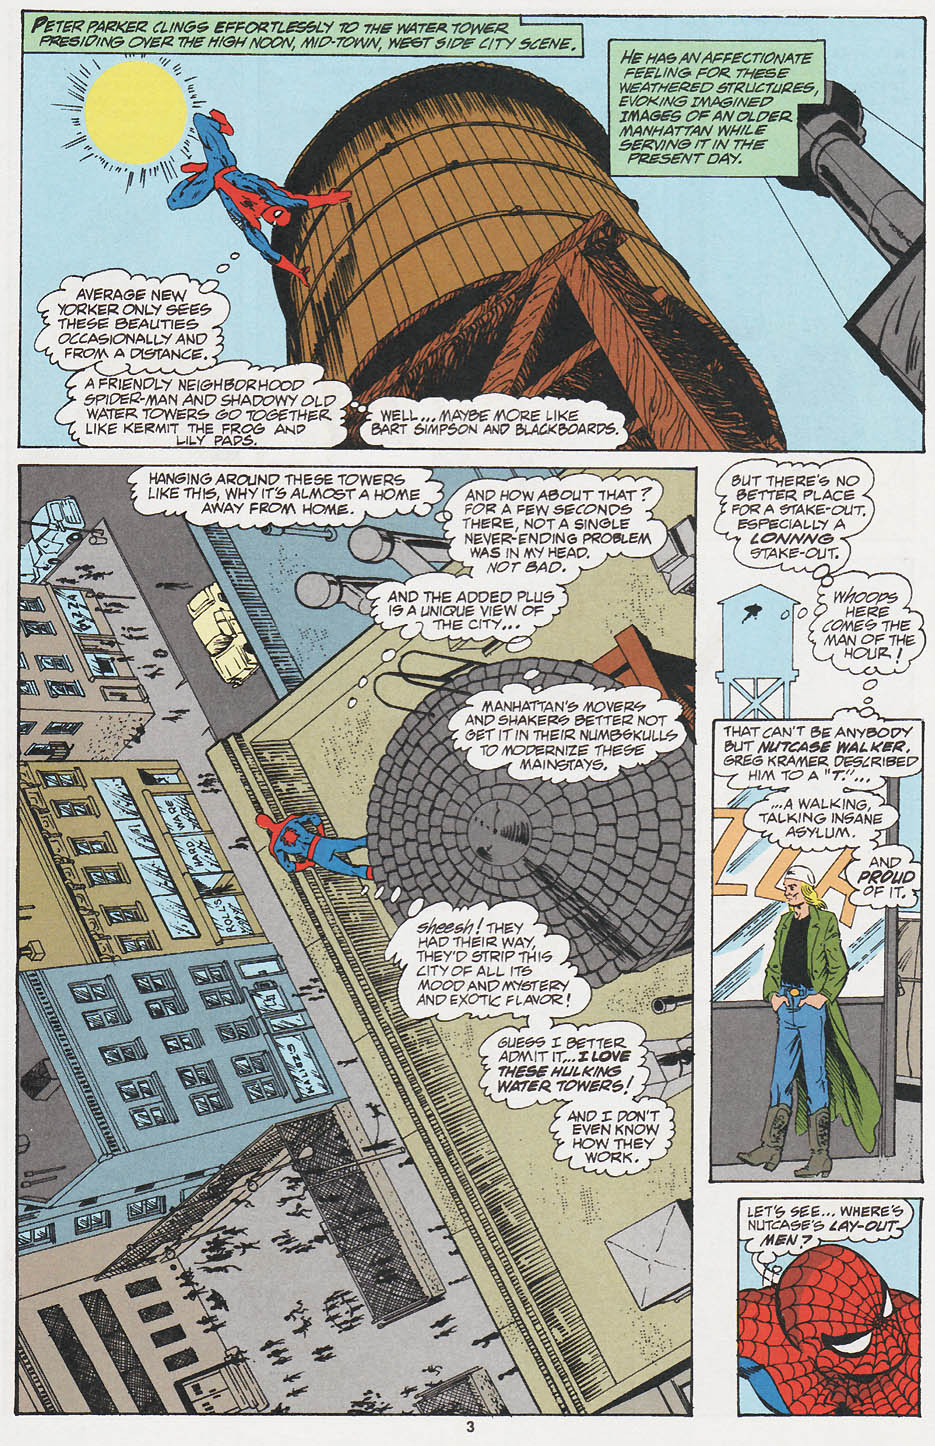 Spider-Man (1990) 27_-_Theres_Something_About_A_Gun_Part_1 Page 3